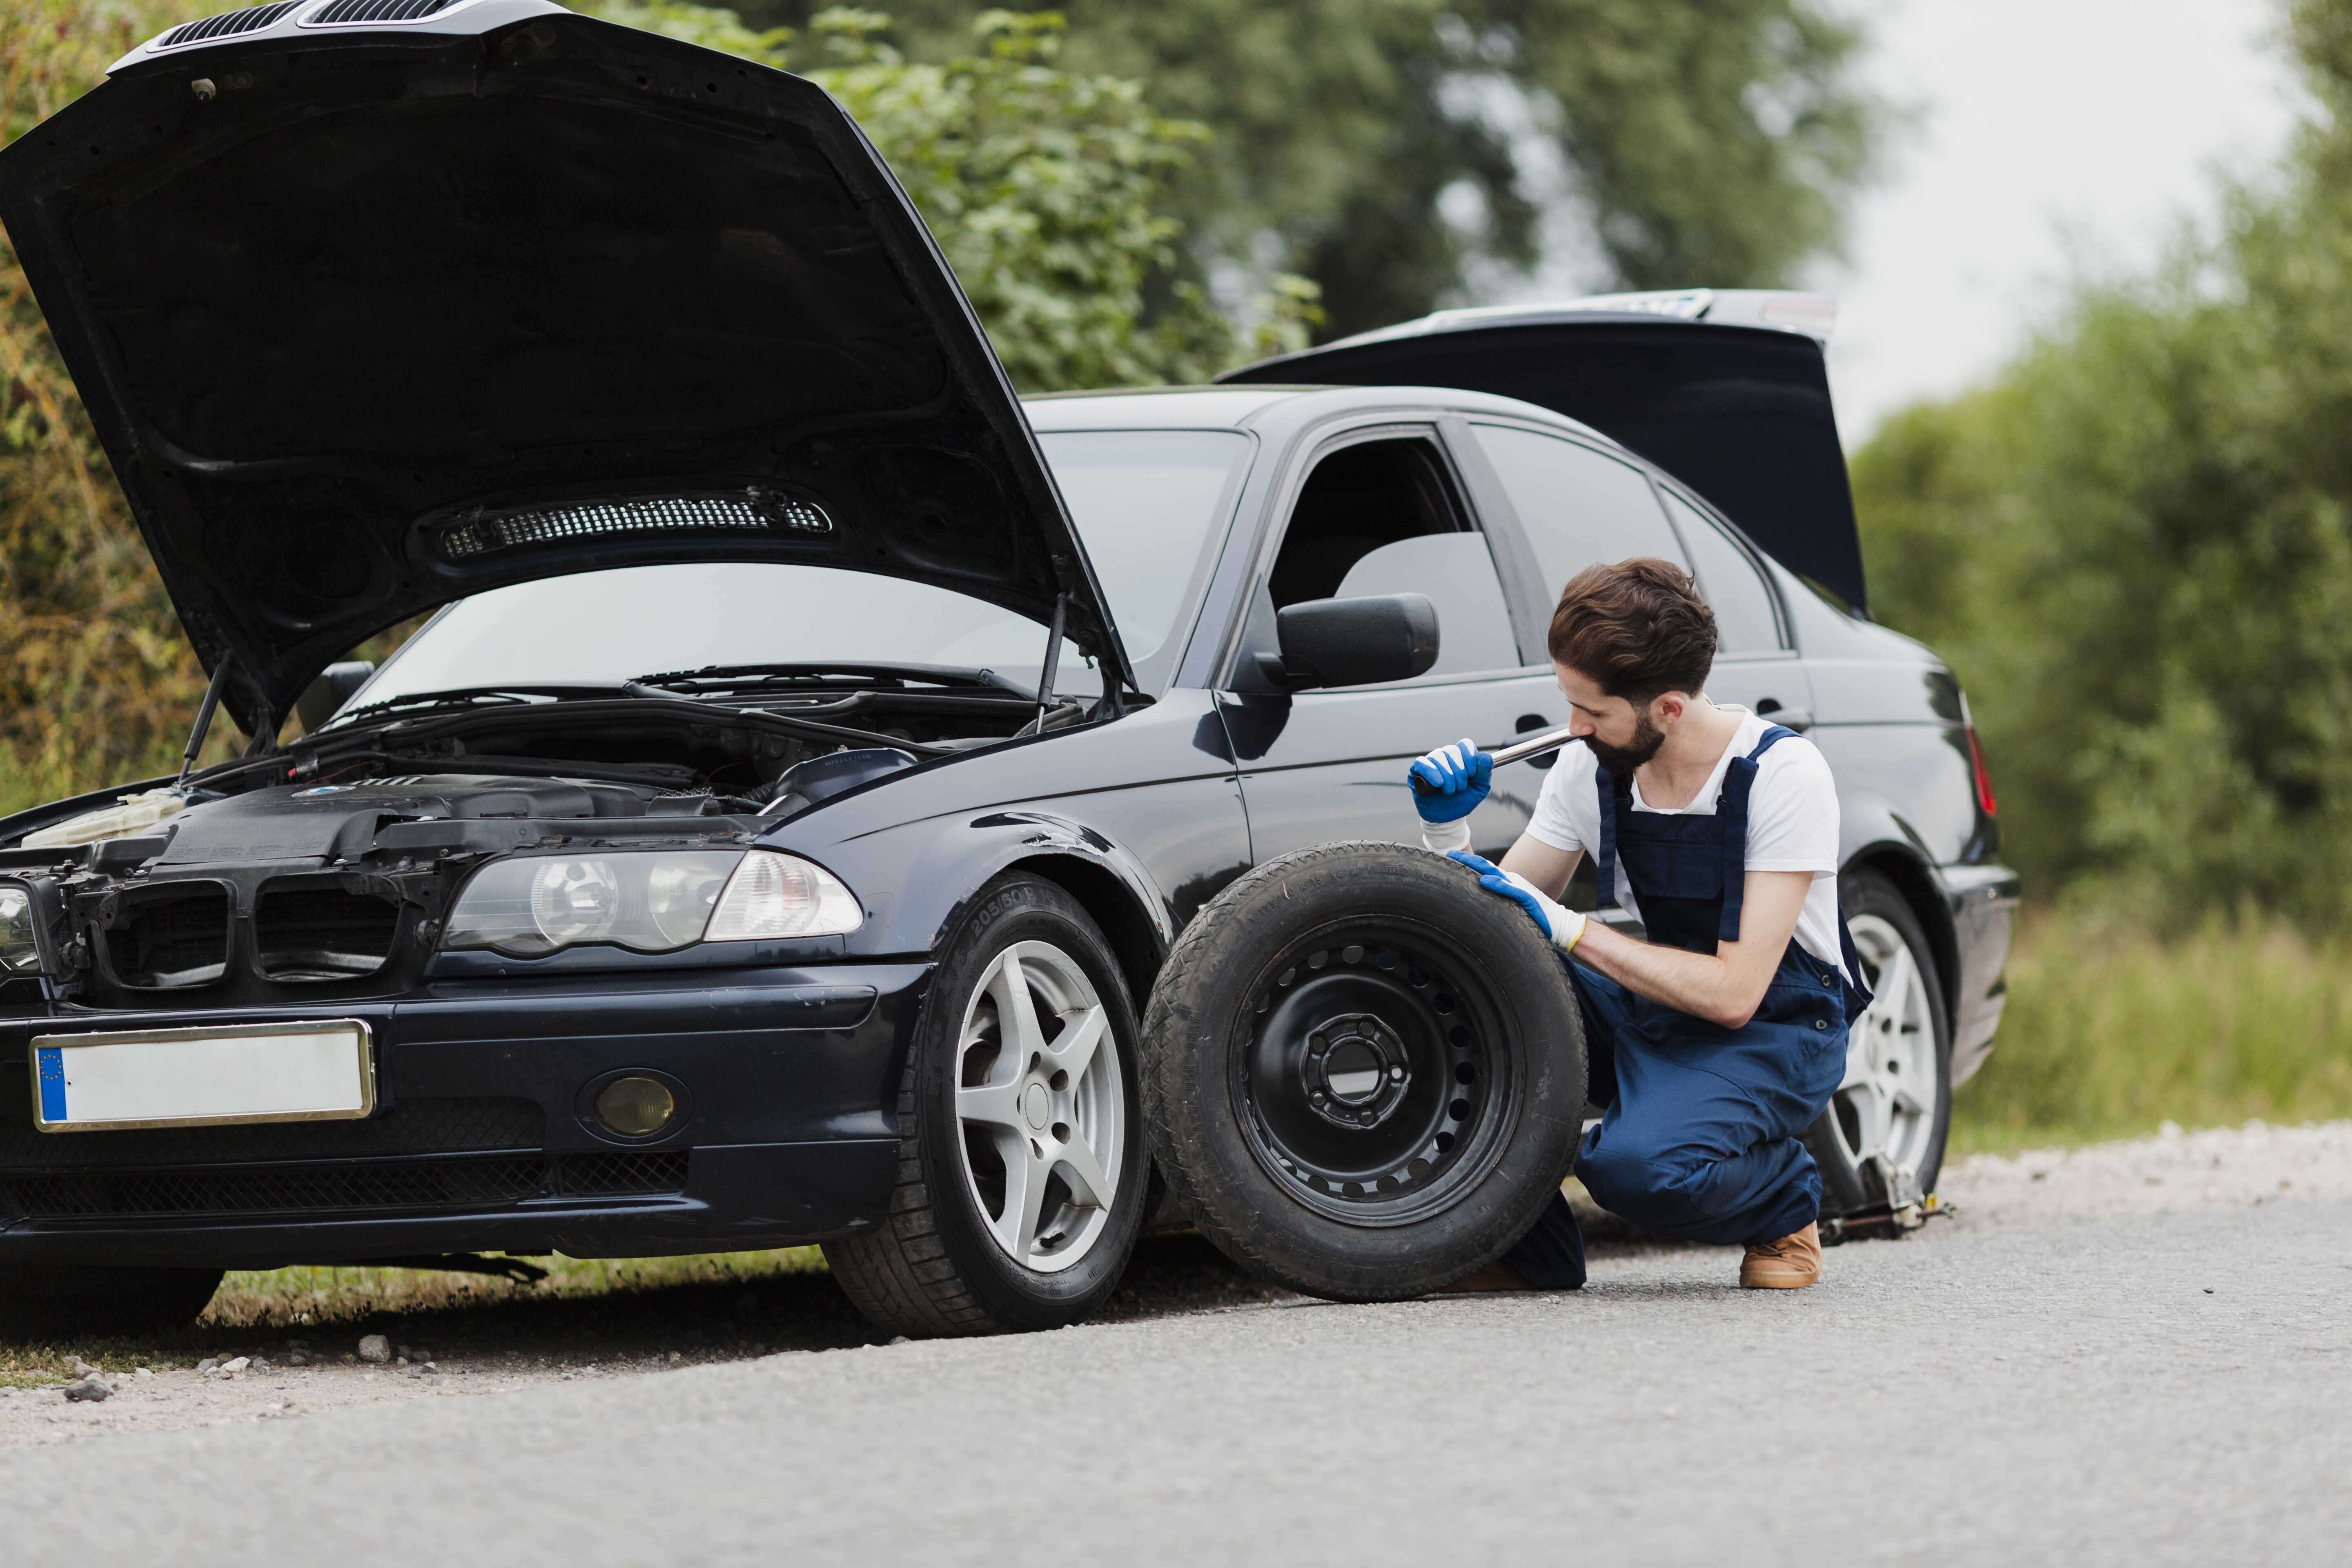 The role of car rescue and mobile tire service 